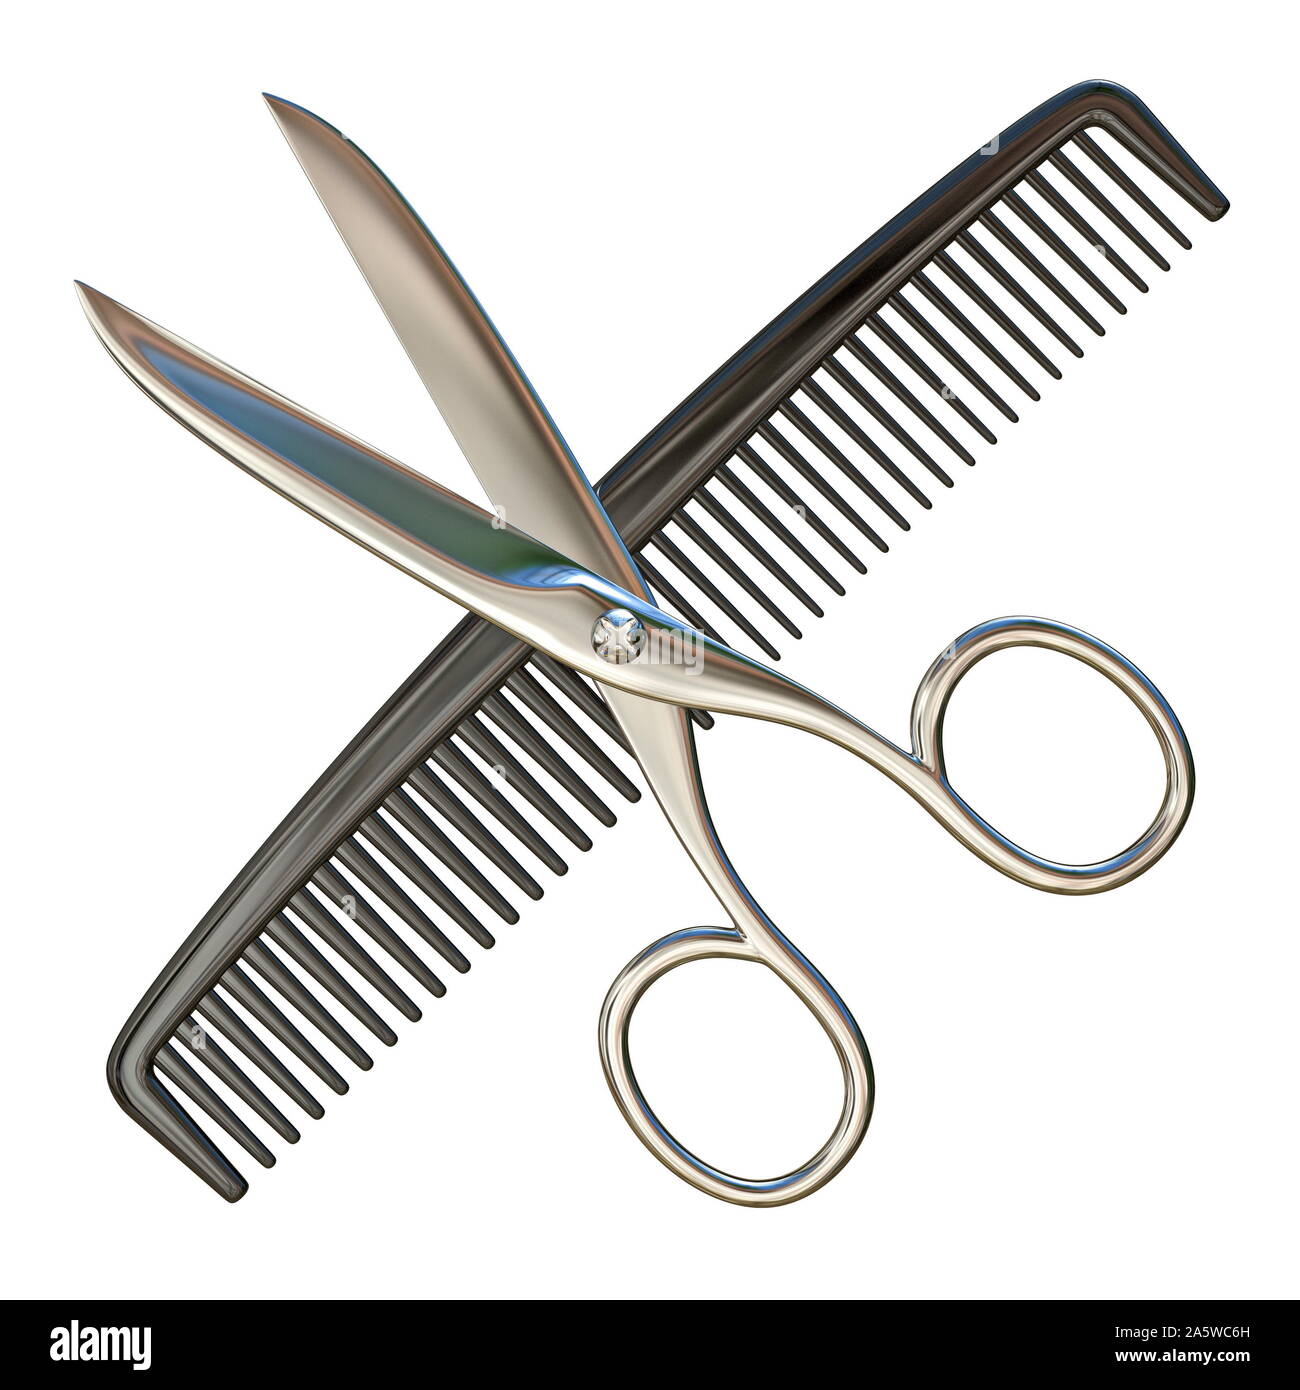 Scissors and comb 3D render illustration isolated on white background Stock Photo